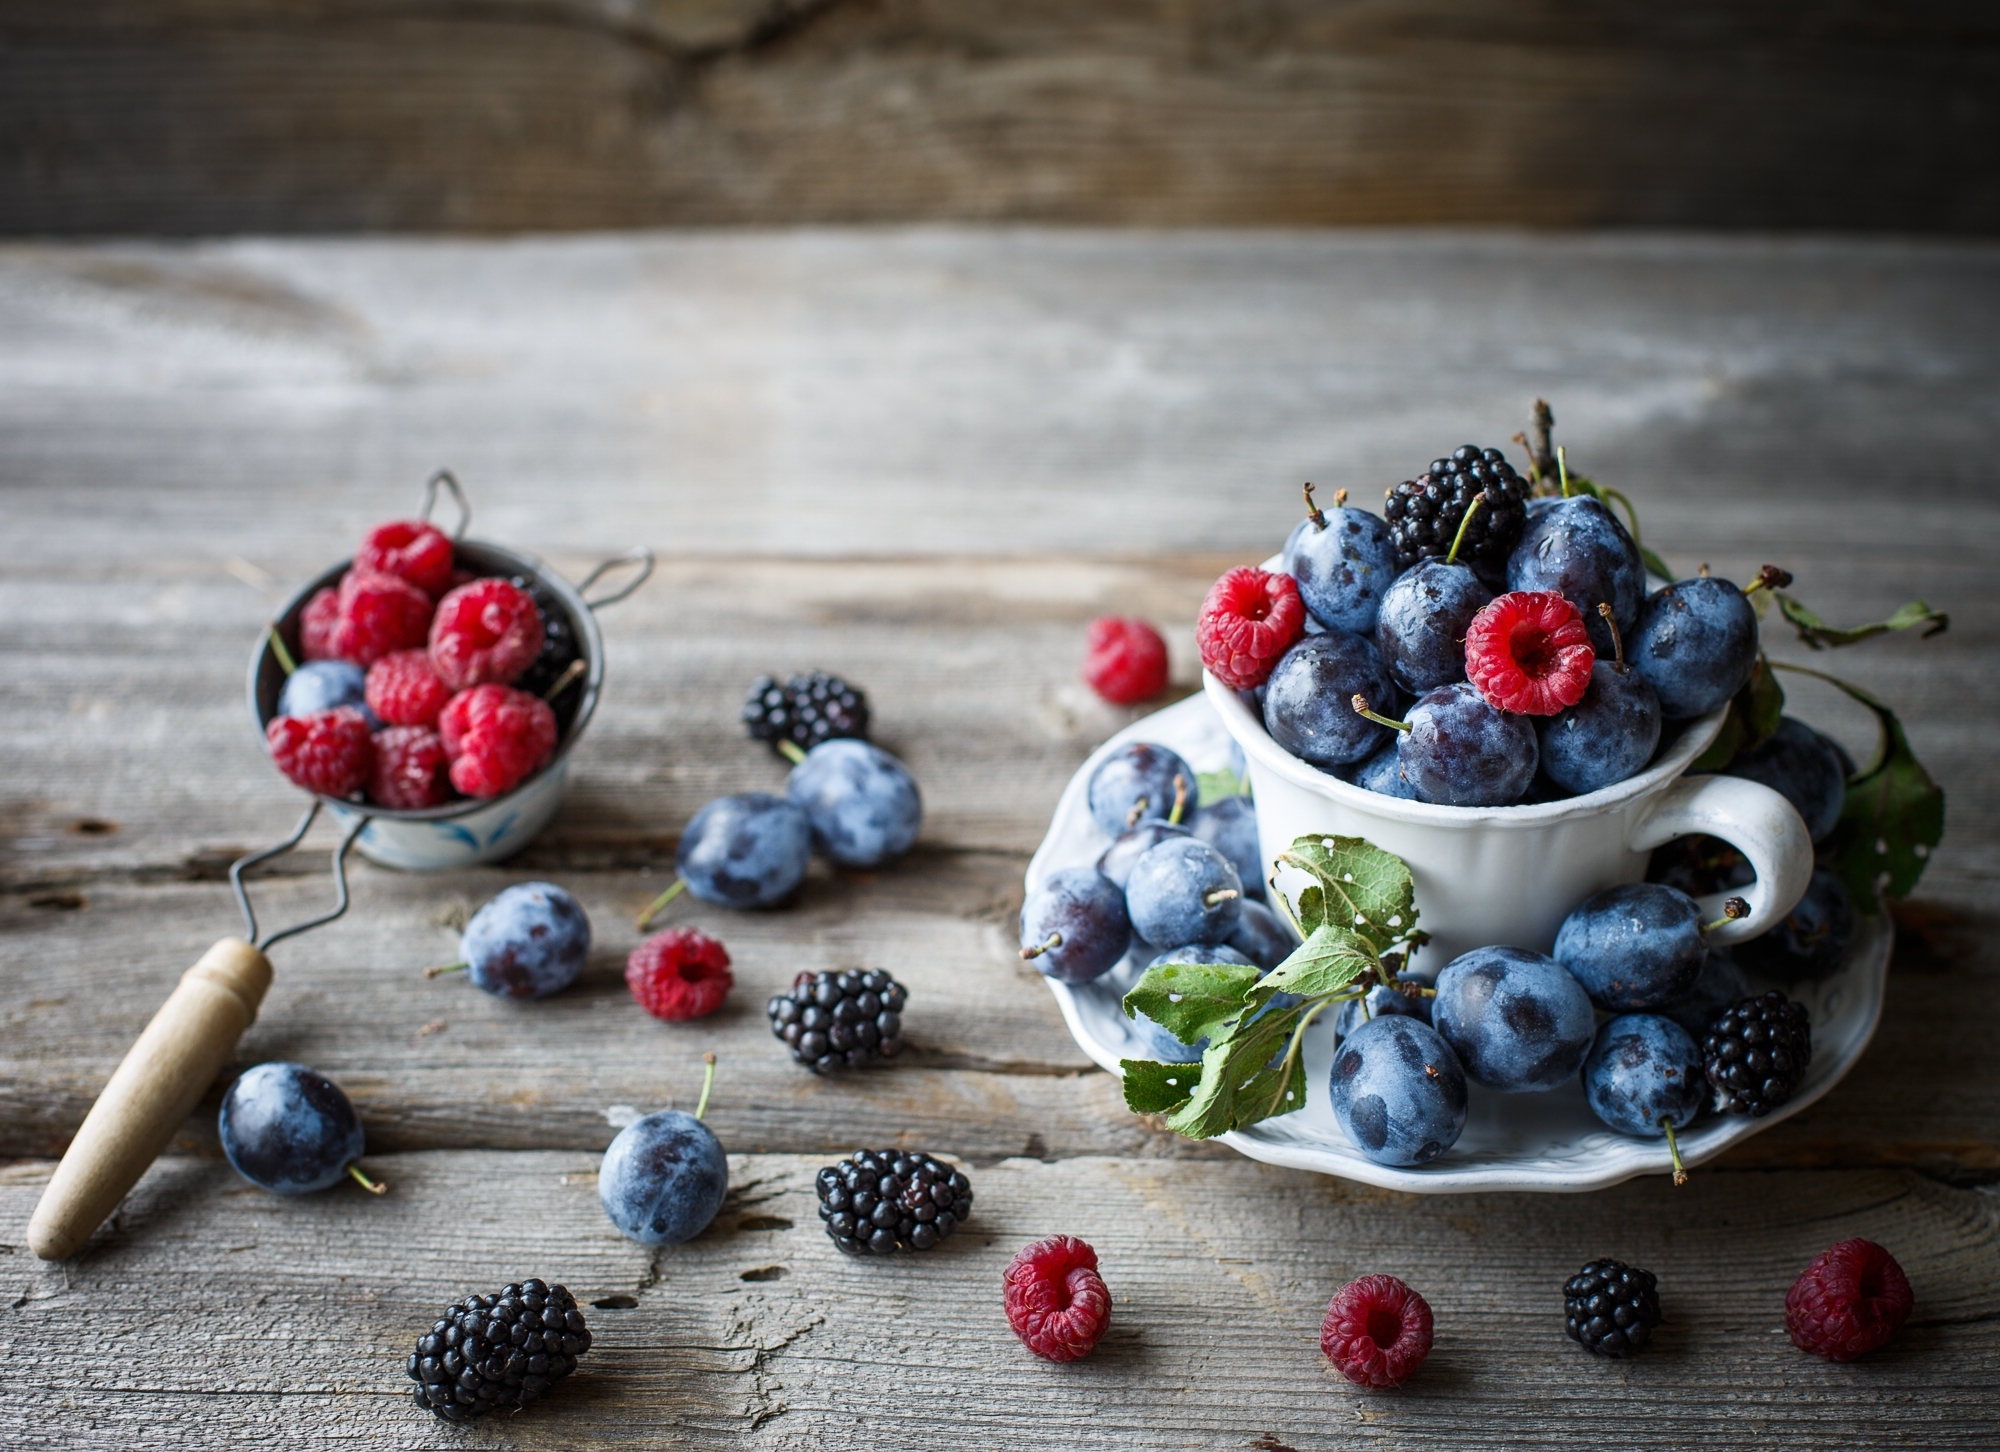 123664 download wallpaper food, raspberry, berries, blackberry screensavers and pictures for free